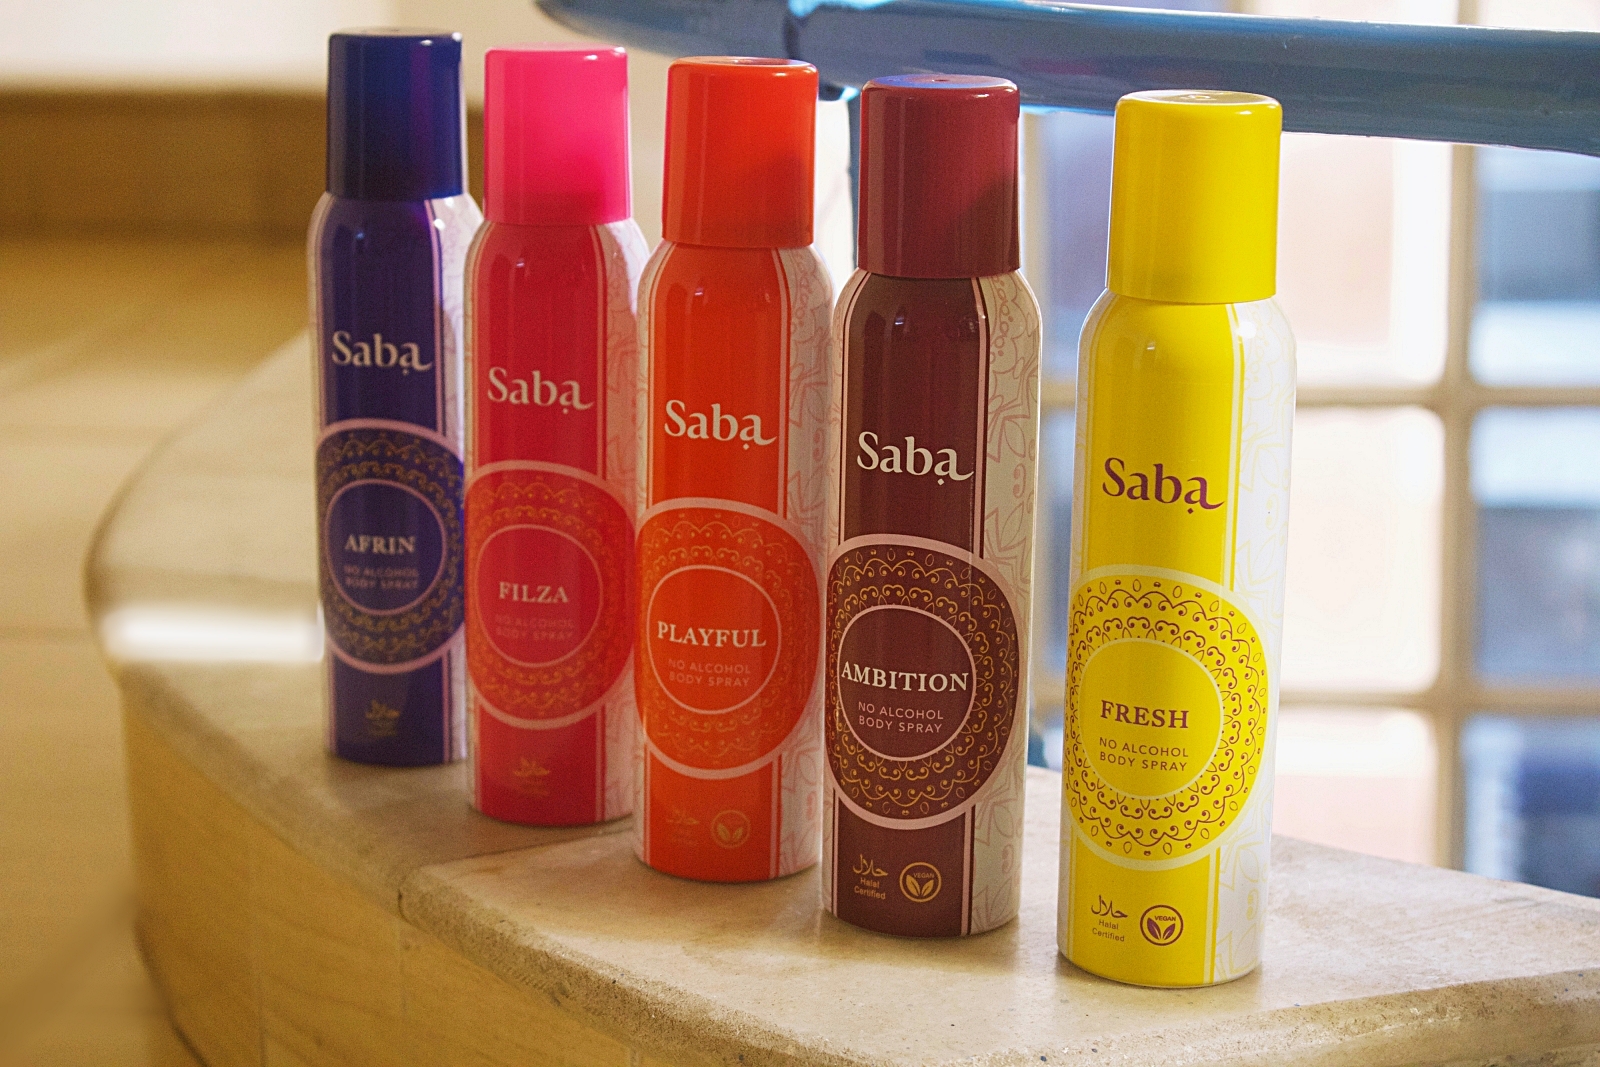 Take a look at Saba personal care products